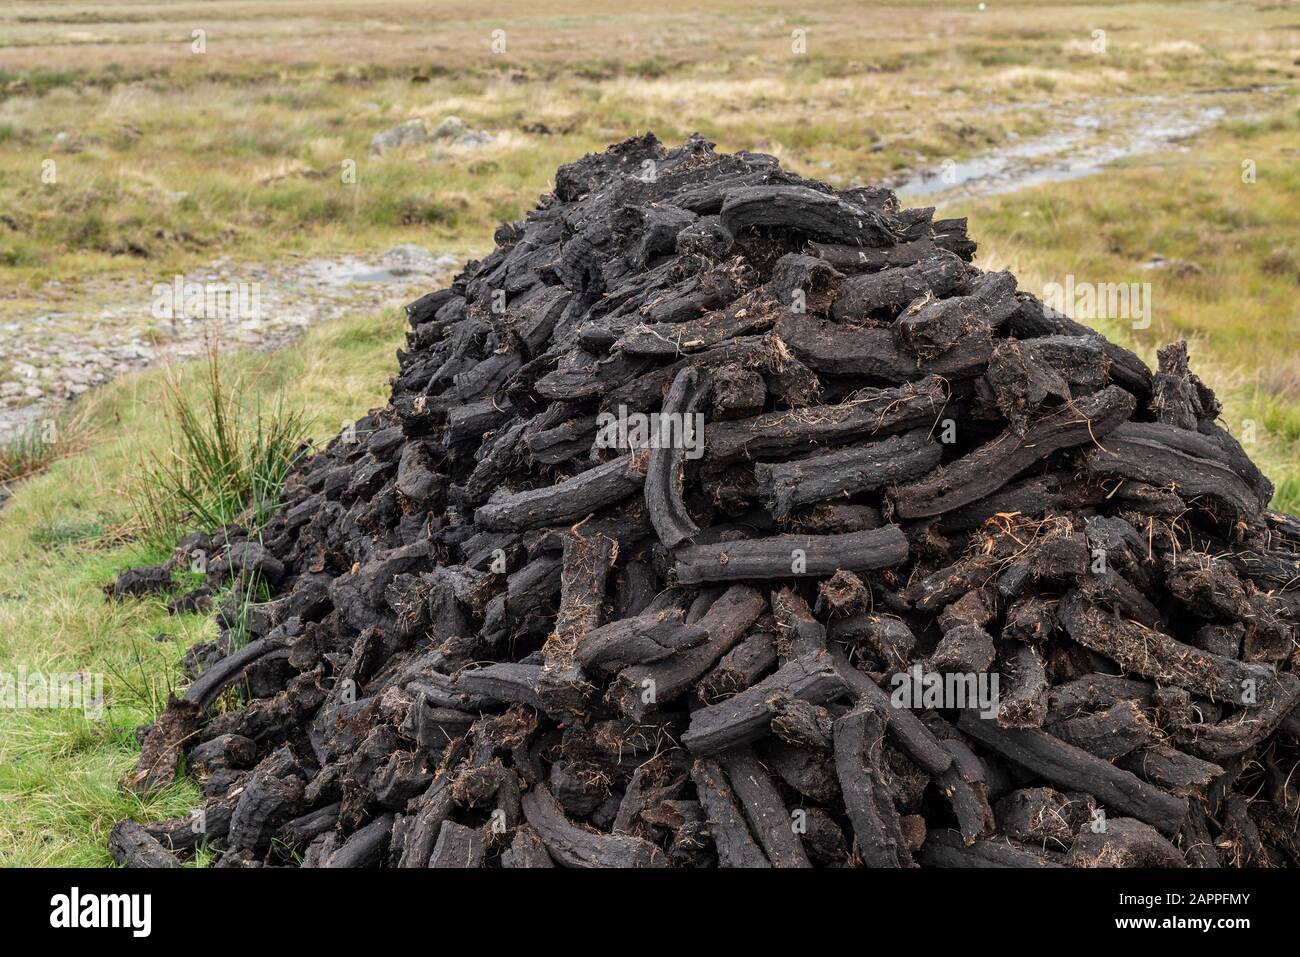 A stack of dried sods of peat or turf in August, awaiting collection for use as fuel having been cut and dried on a bog in County Mayo, Ireland Stock Photo